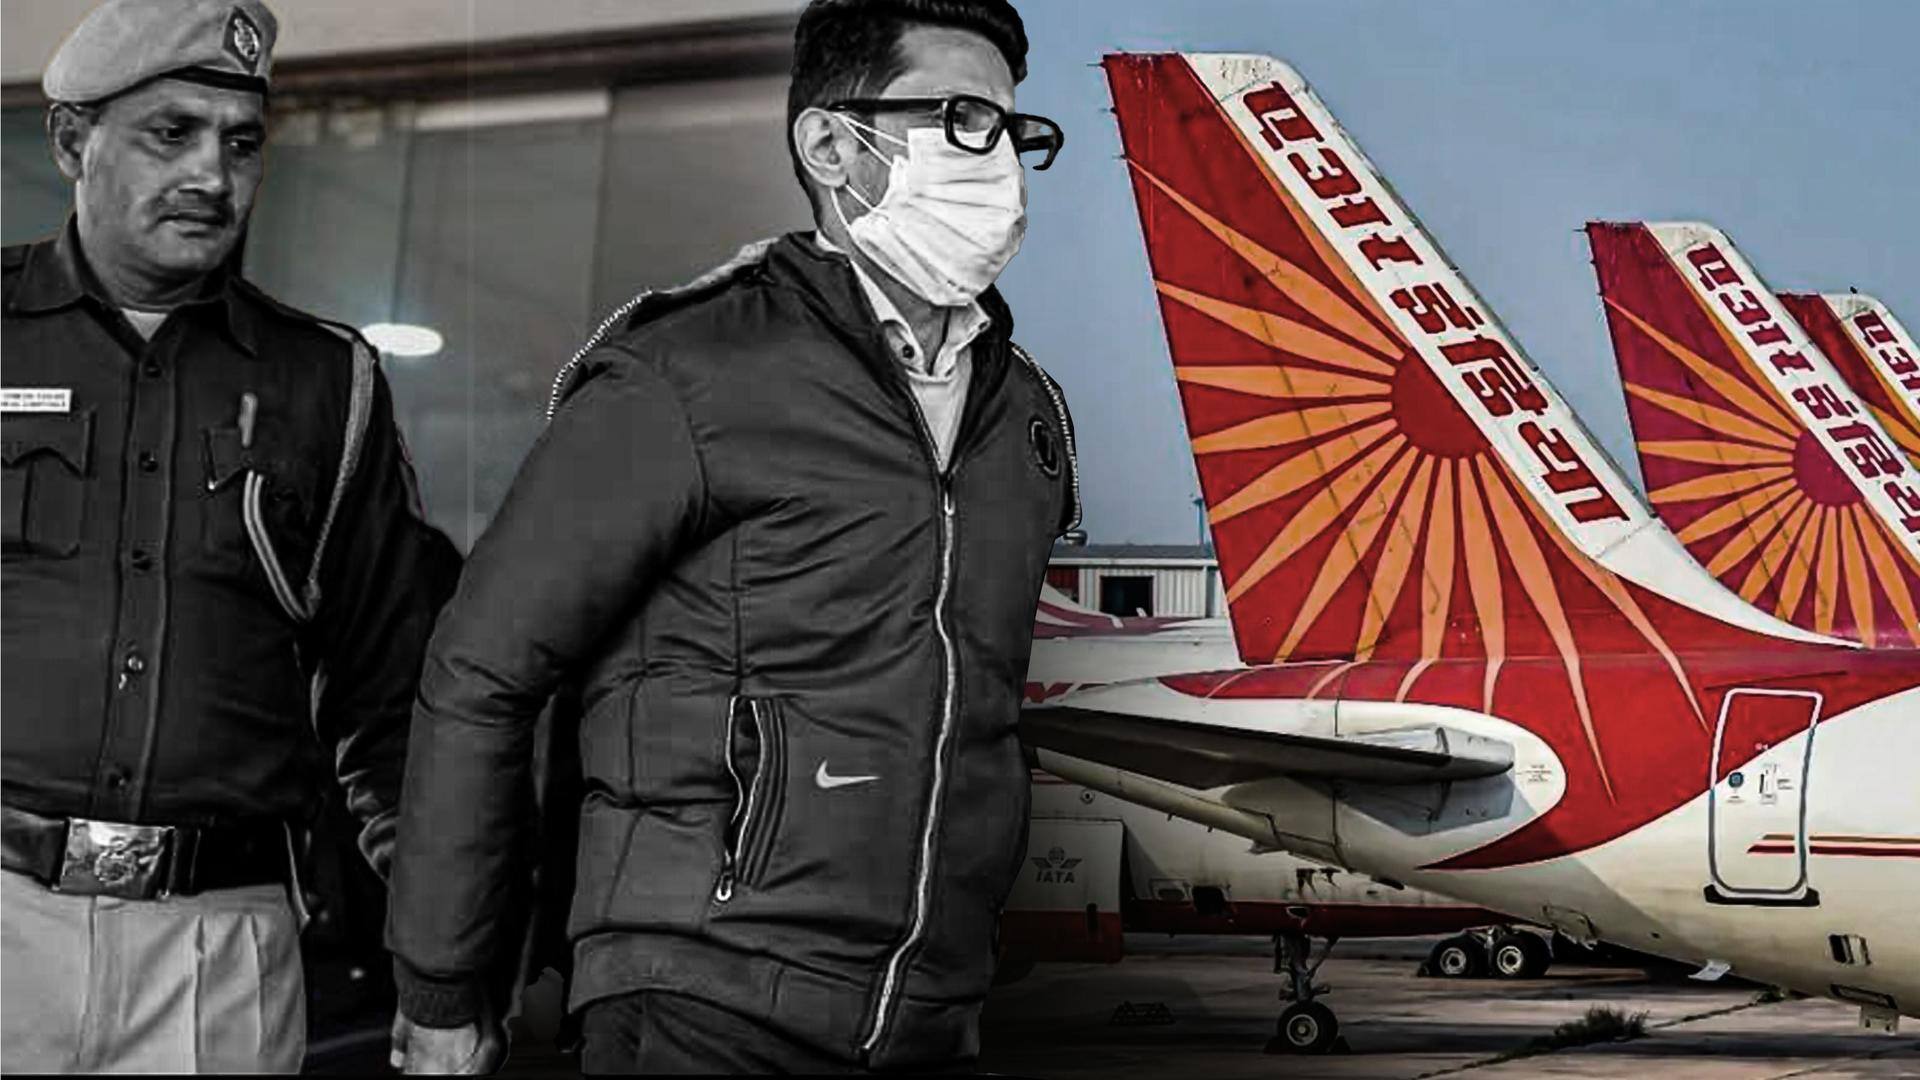 Air India urination case: Woman peed on herself, claims accused